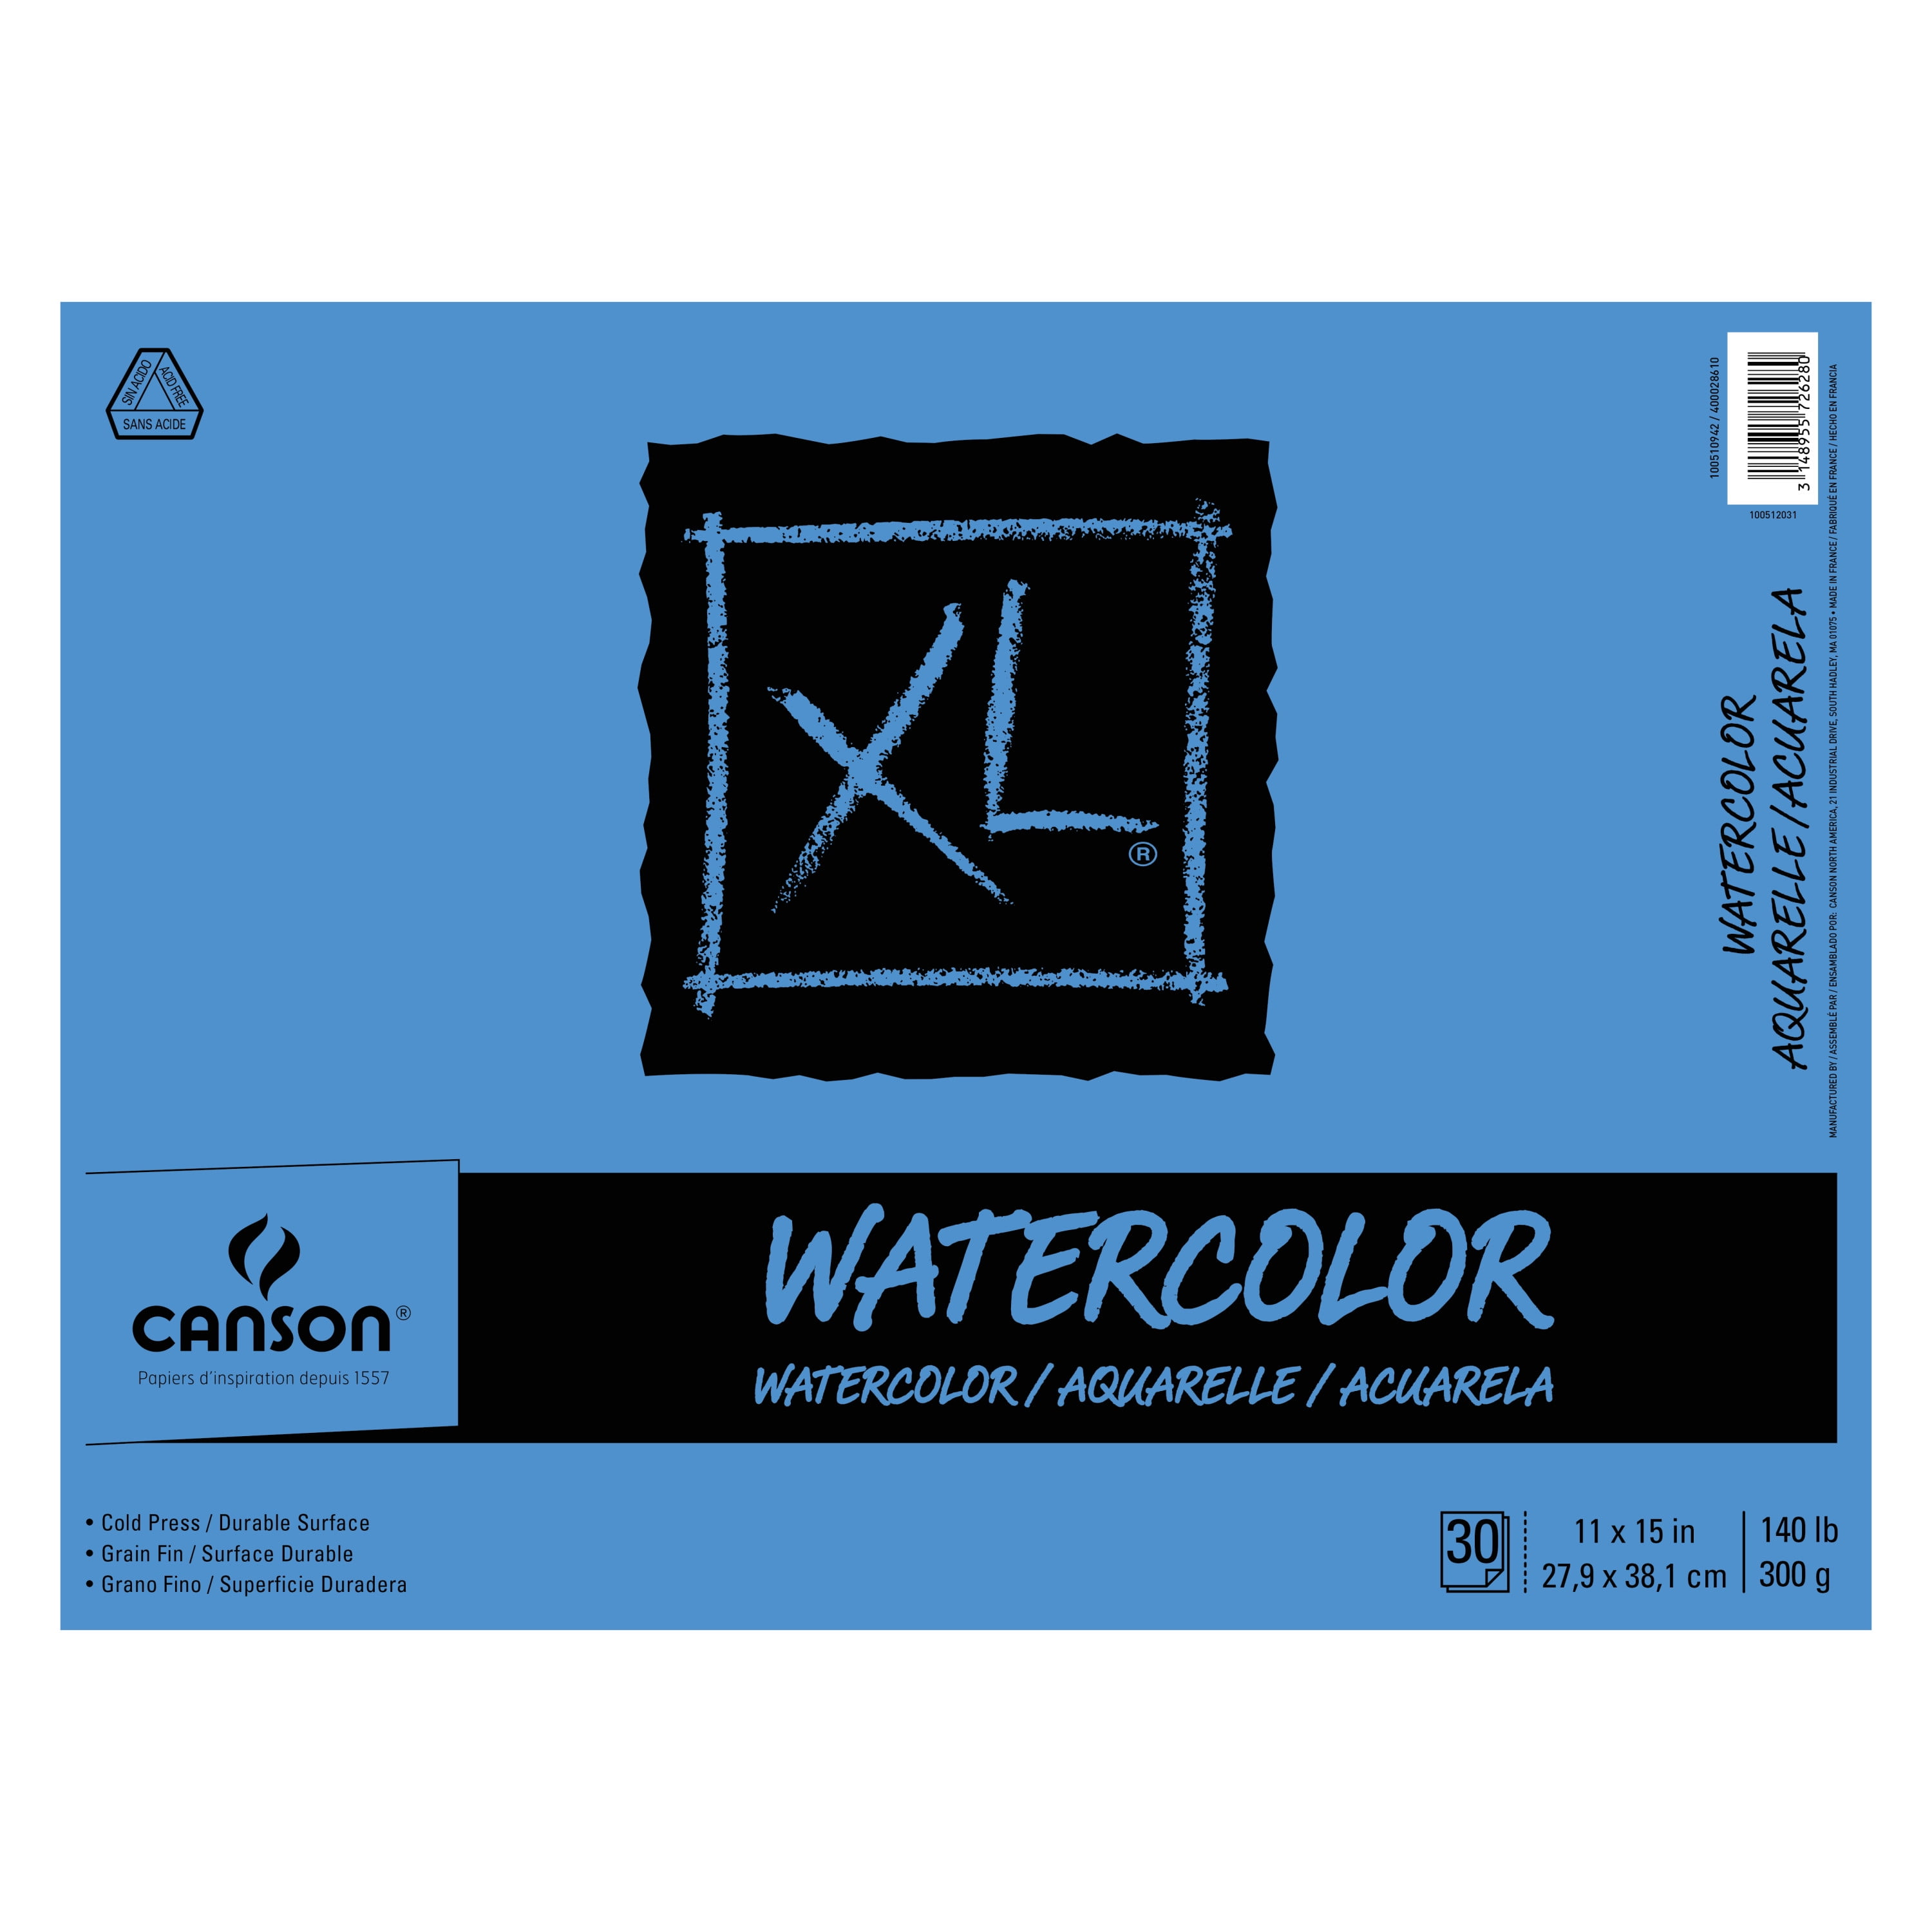 Canson Artist Series Watercolor Paper, Wirebound Pad, 9x20 inches, 20  Sheets (140lb/300g) - Artist Paper for Adults and Students - Watercolors,  Mixed